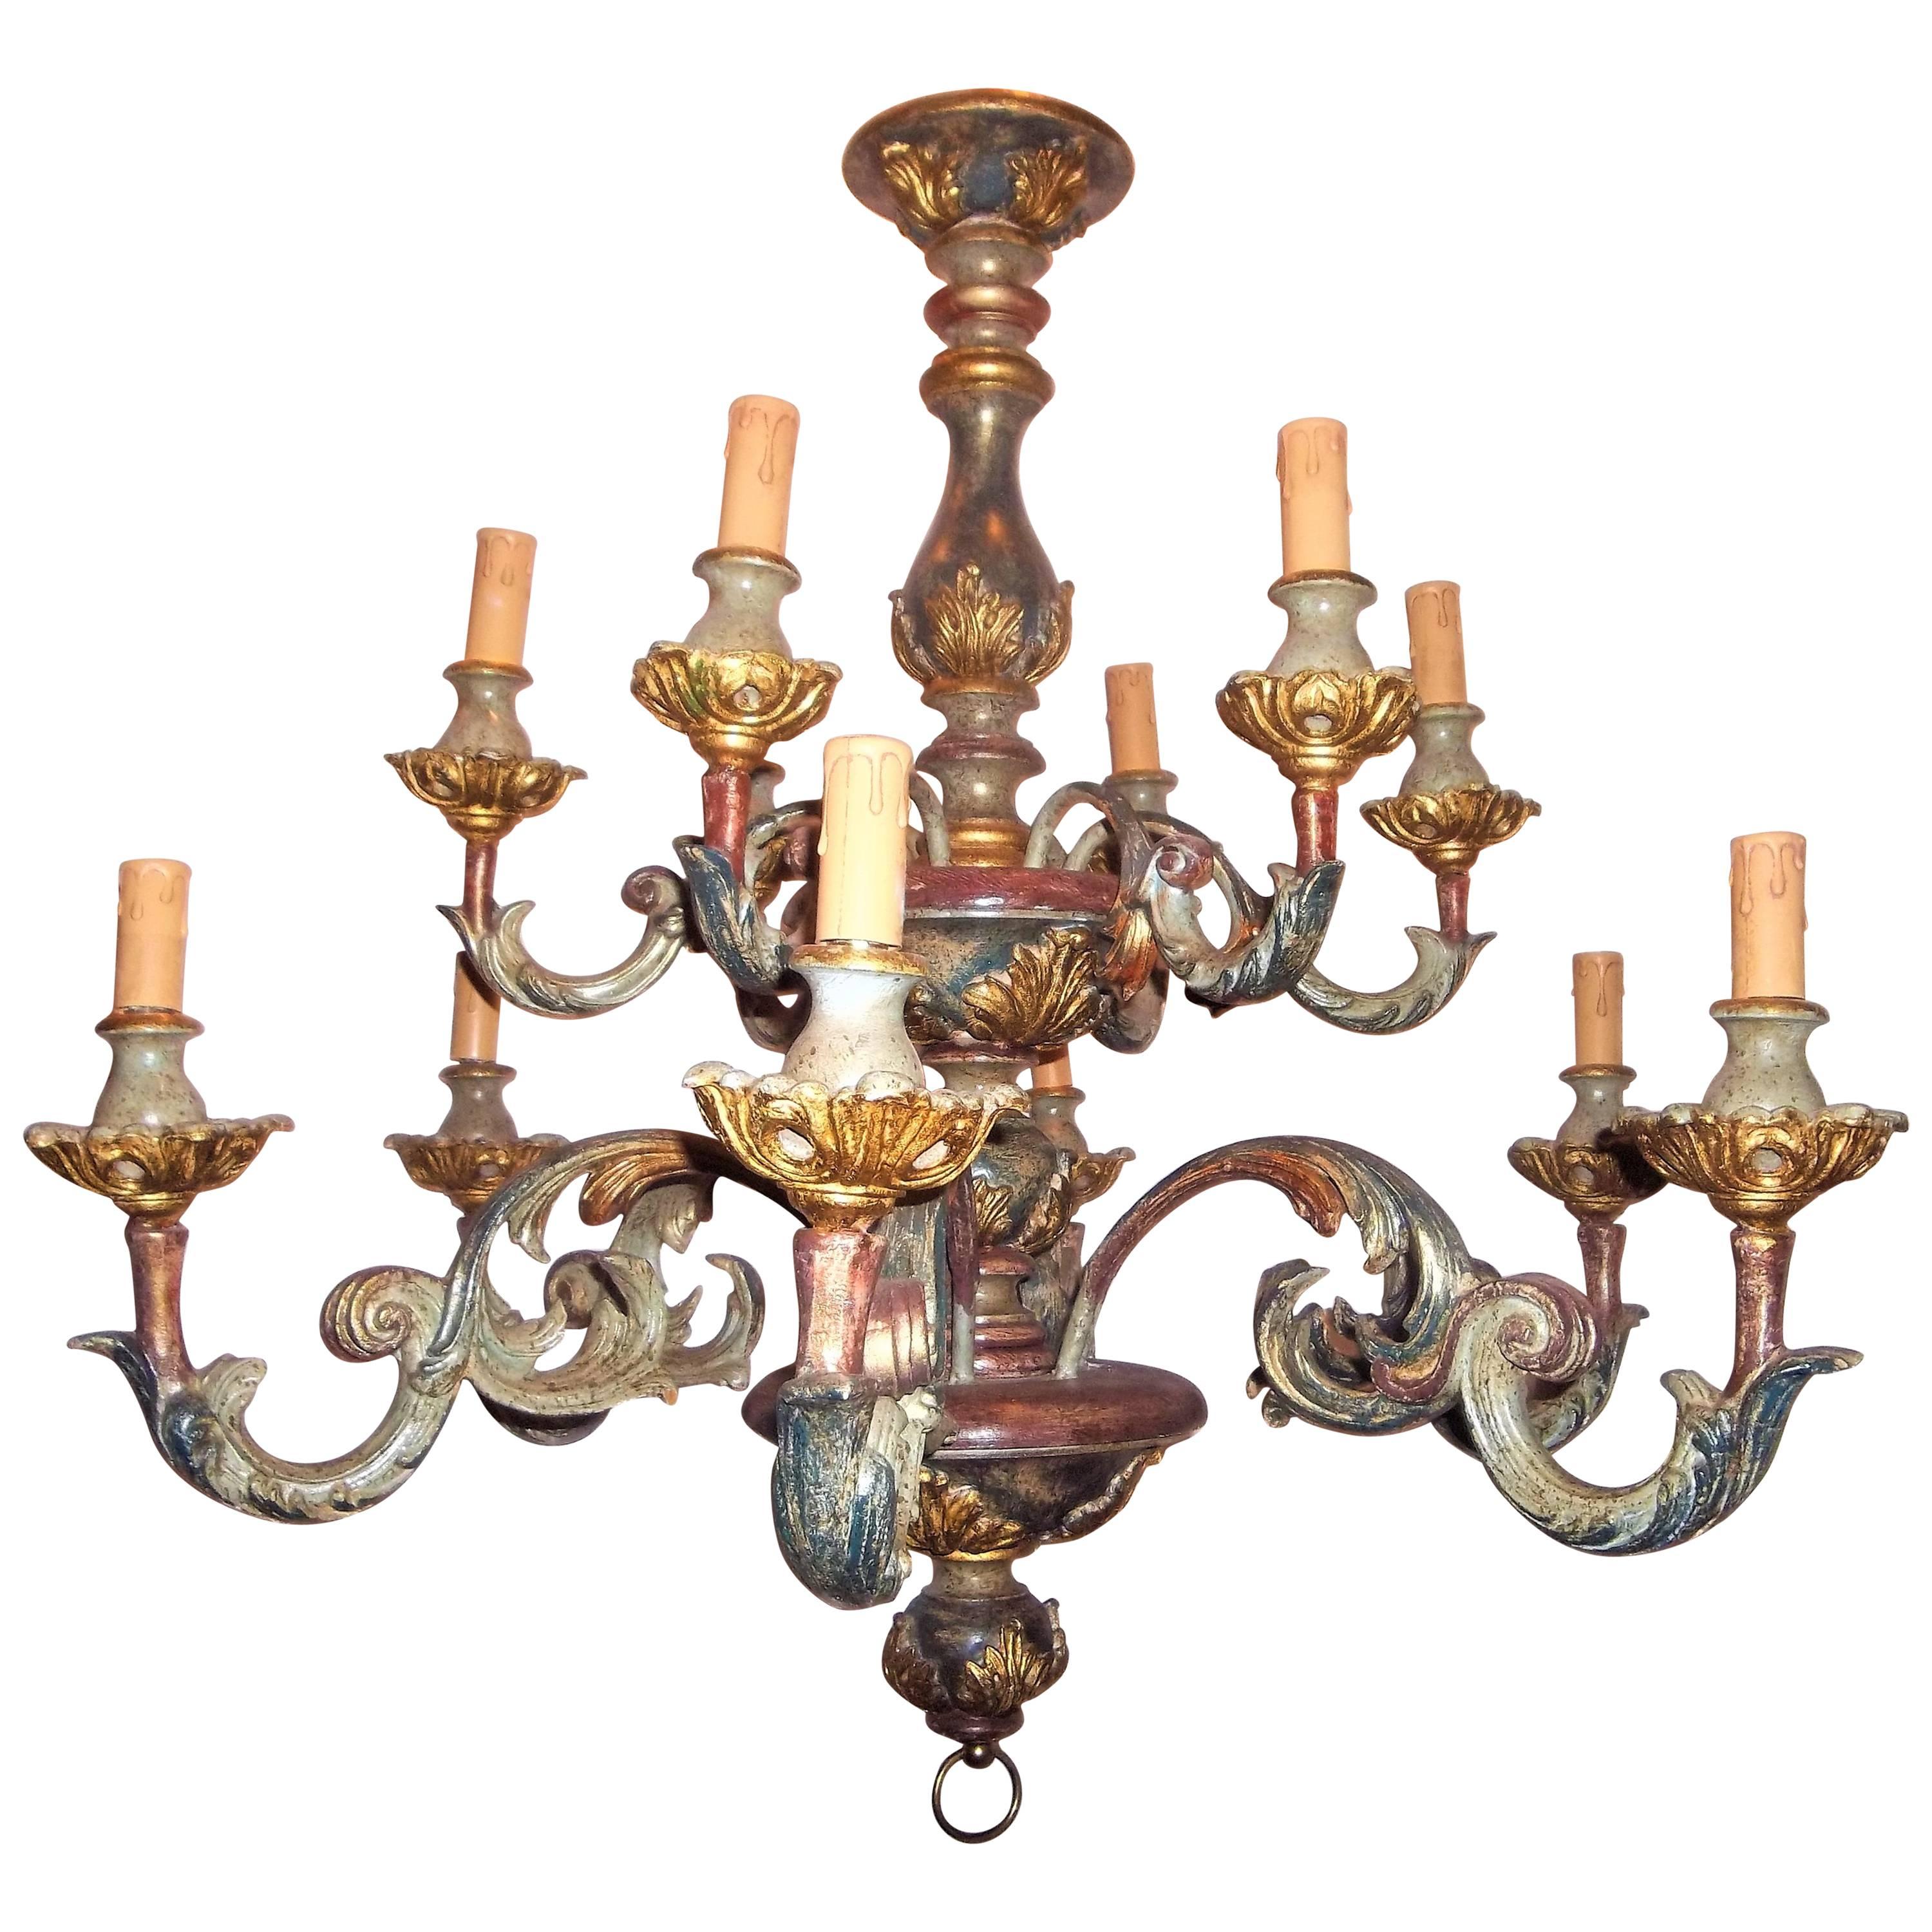 Carved Painted Venetian Rococo Style Chandelier with Gilt Highlights